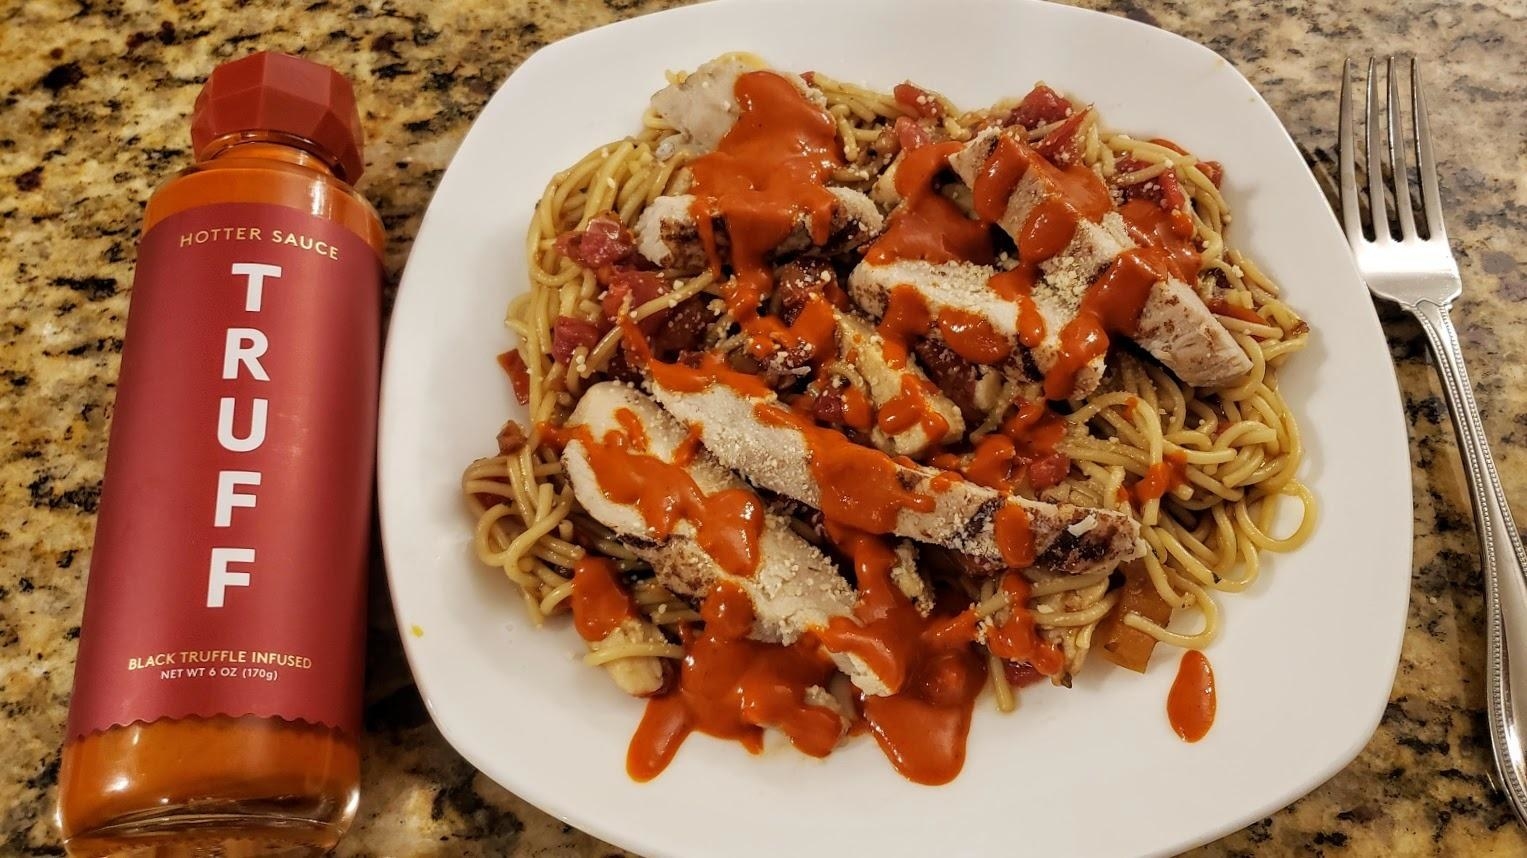 reviewer image of the truffle hot sauce bottle next to a plate of food drizzled in the hot sauce